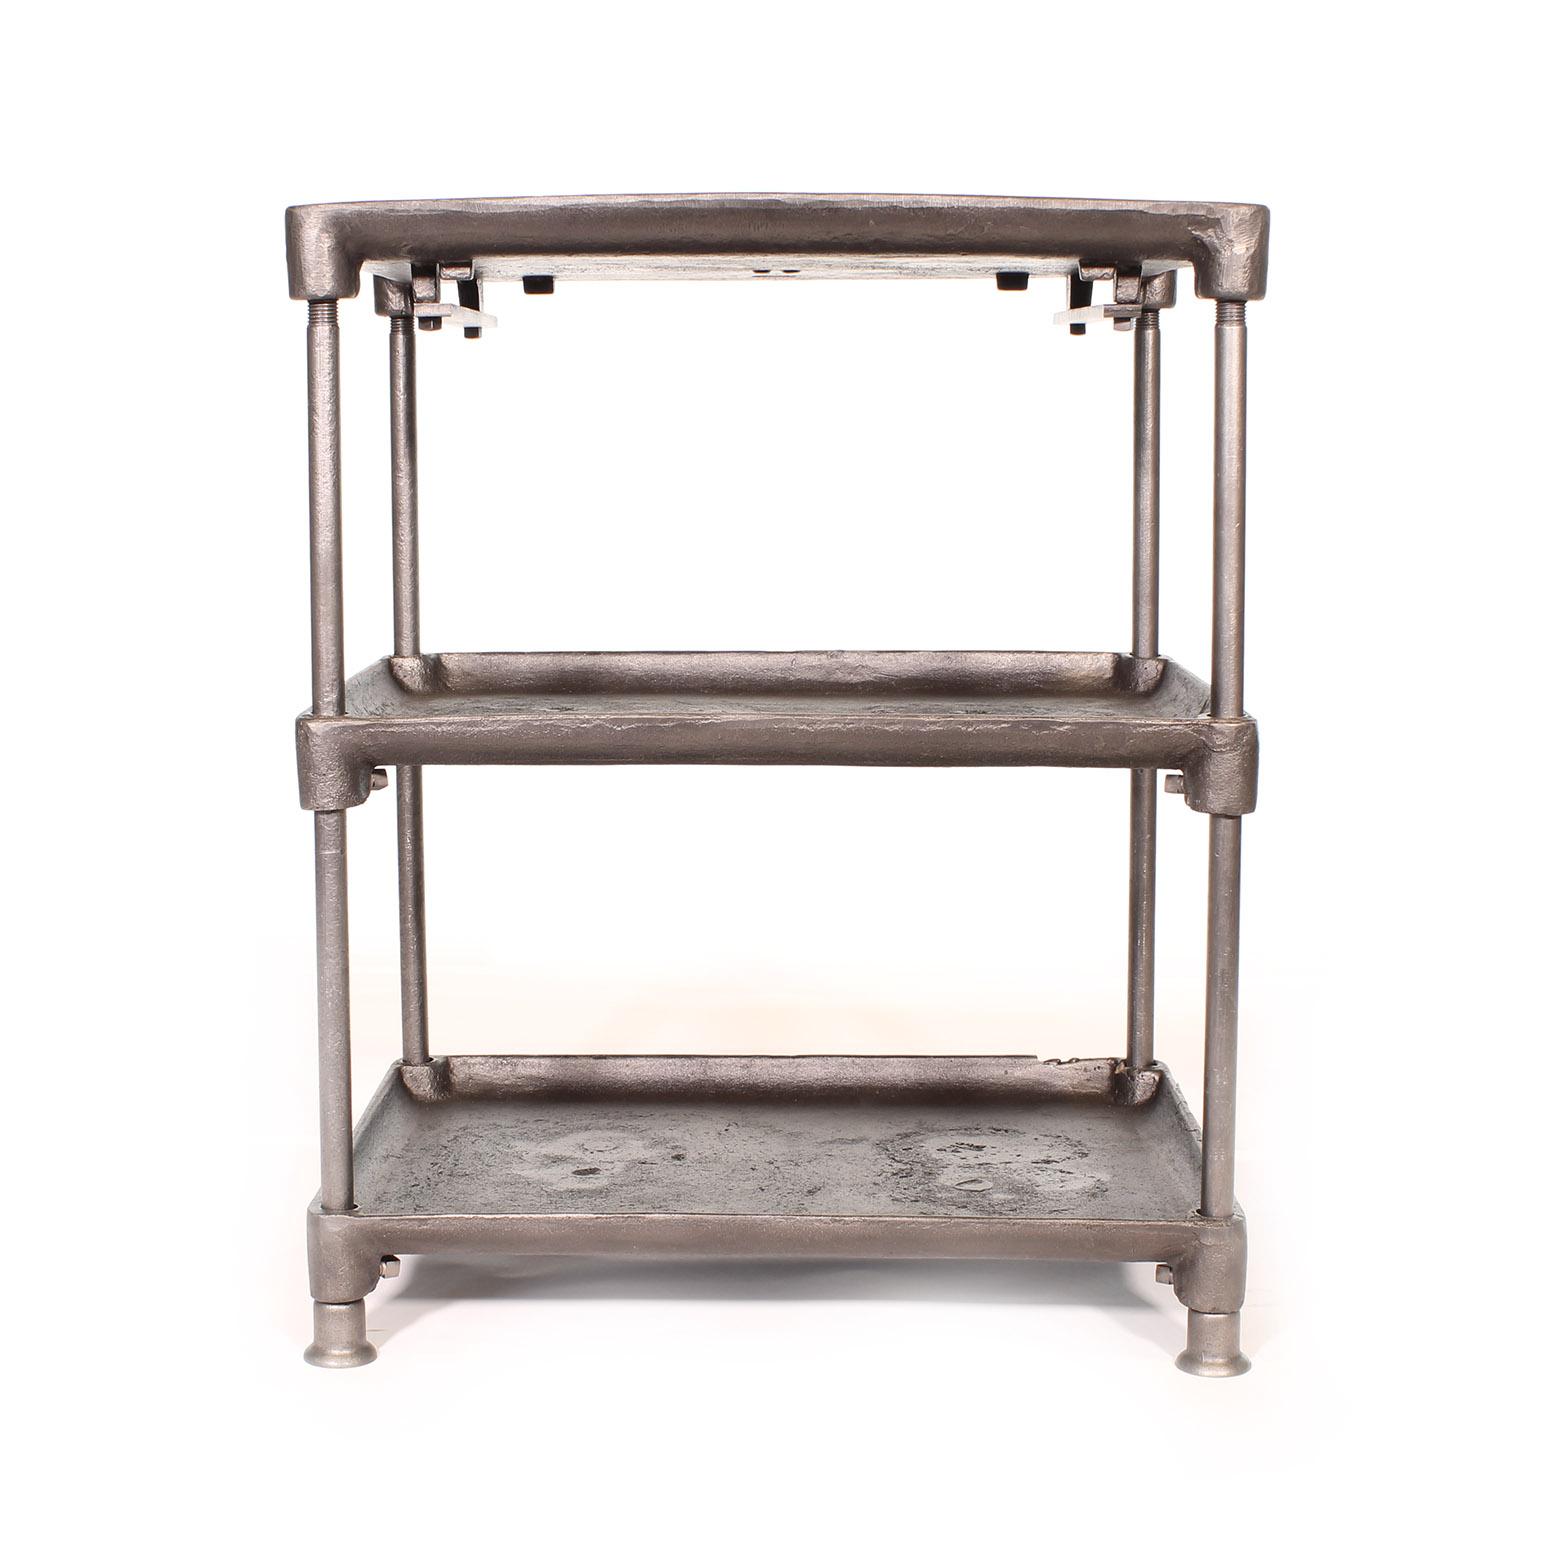 Three-tier cast iron vintage industrial side table, cart with adjustable shelves and cast iron feet. Bottom two shelves adjust via a square set screw. Dimensions are 25 1/4